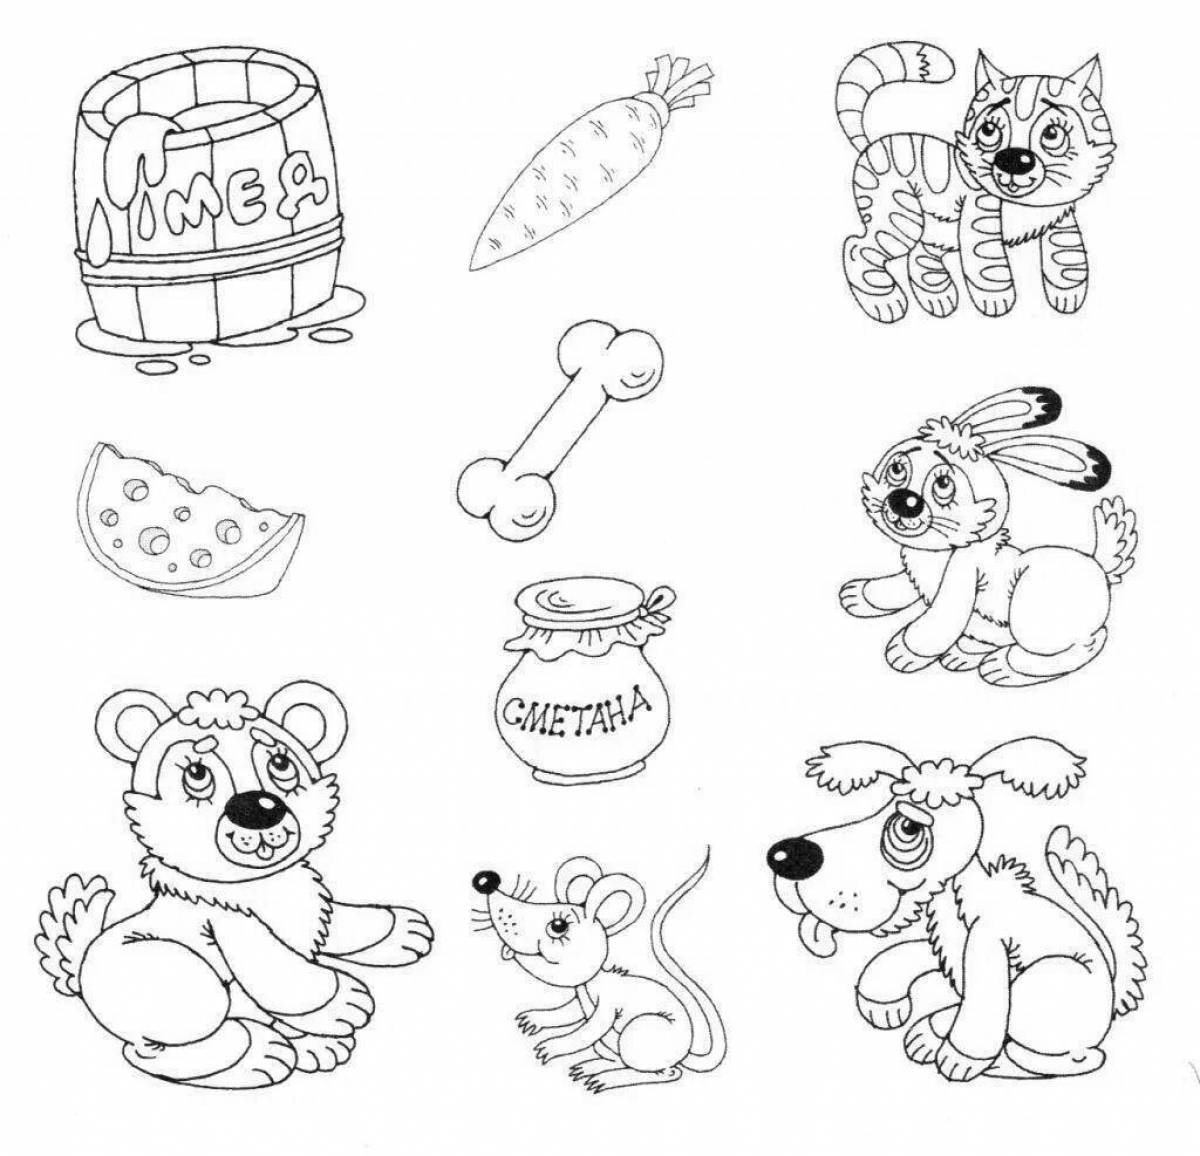 Creative Printable Coloring Pages Archive